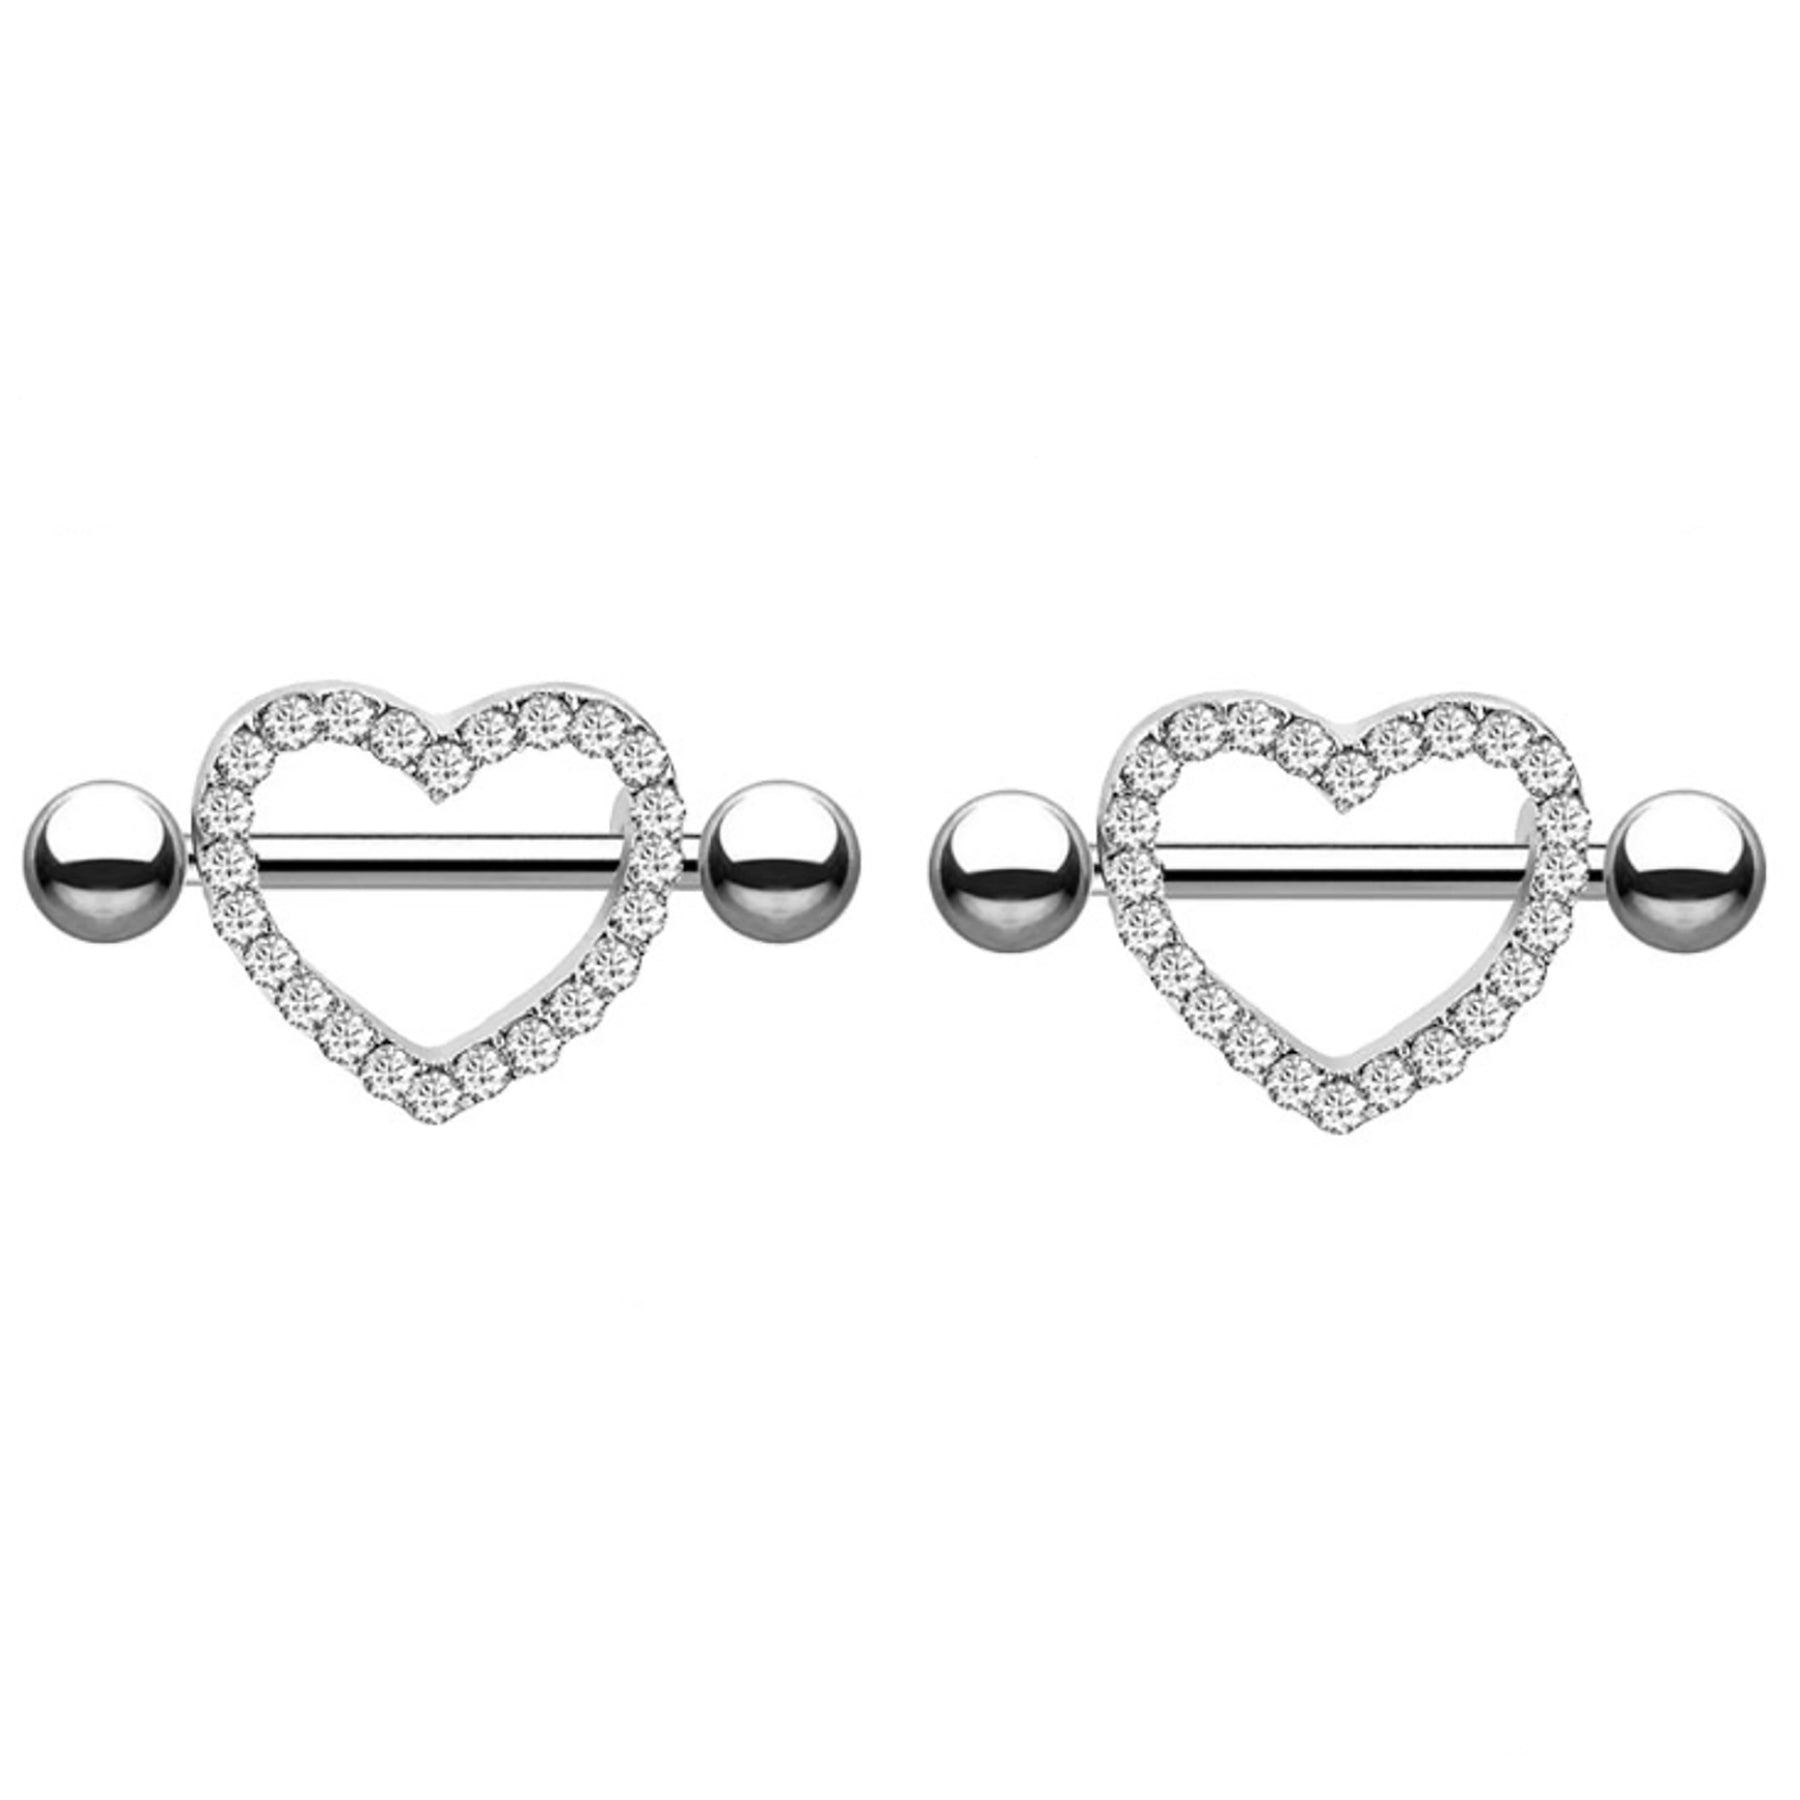 Heart Nipple Piercing Jewelry With 14g Barbells At Mybodiart